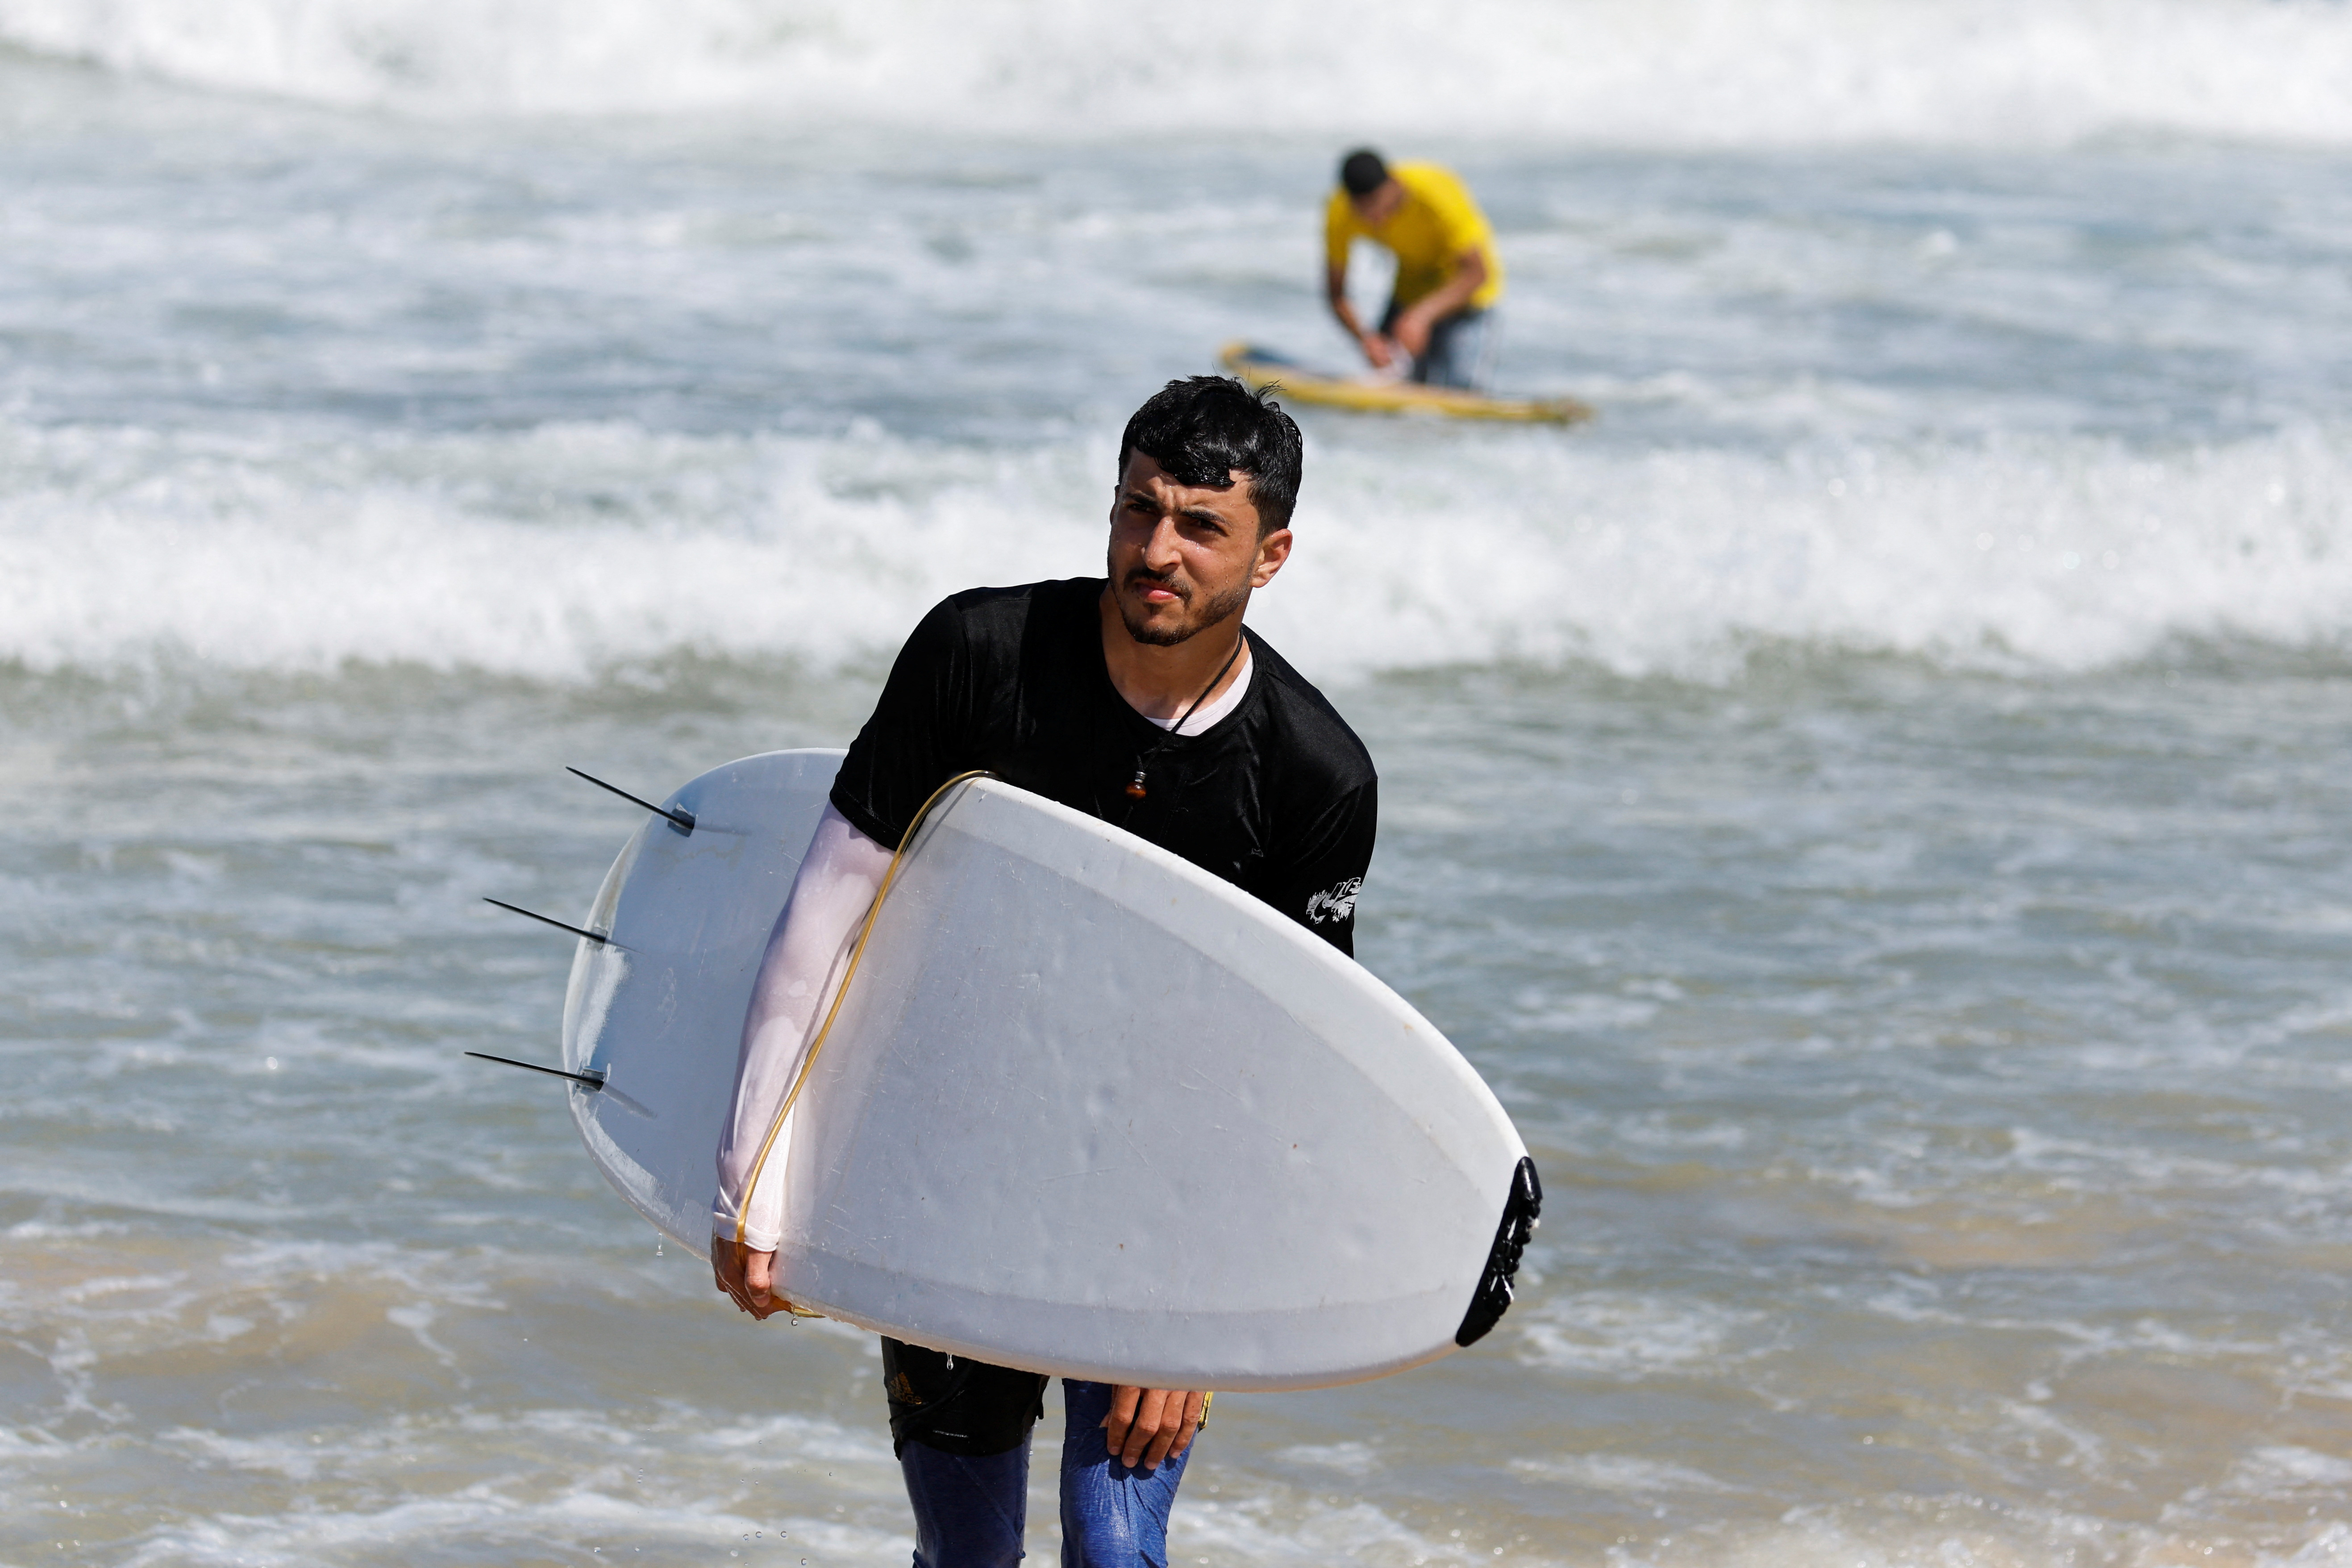 With eyes on the waves, Gaza surfers keep boards handy | Reuters